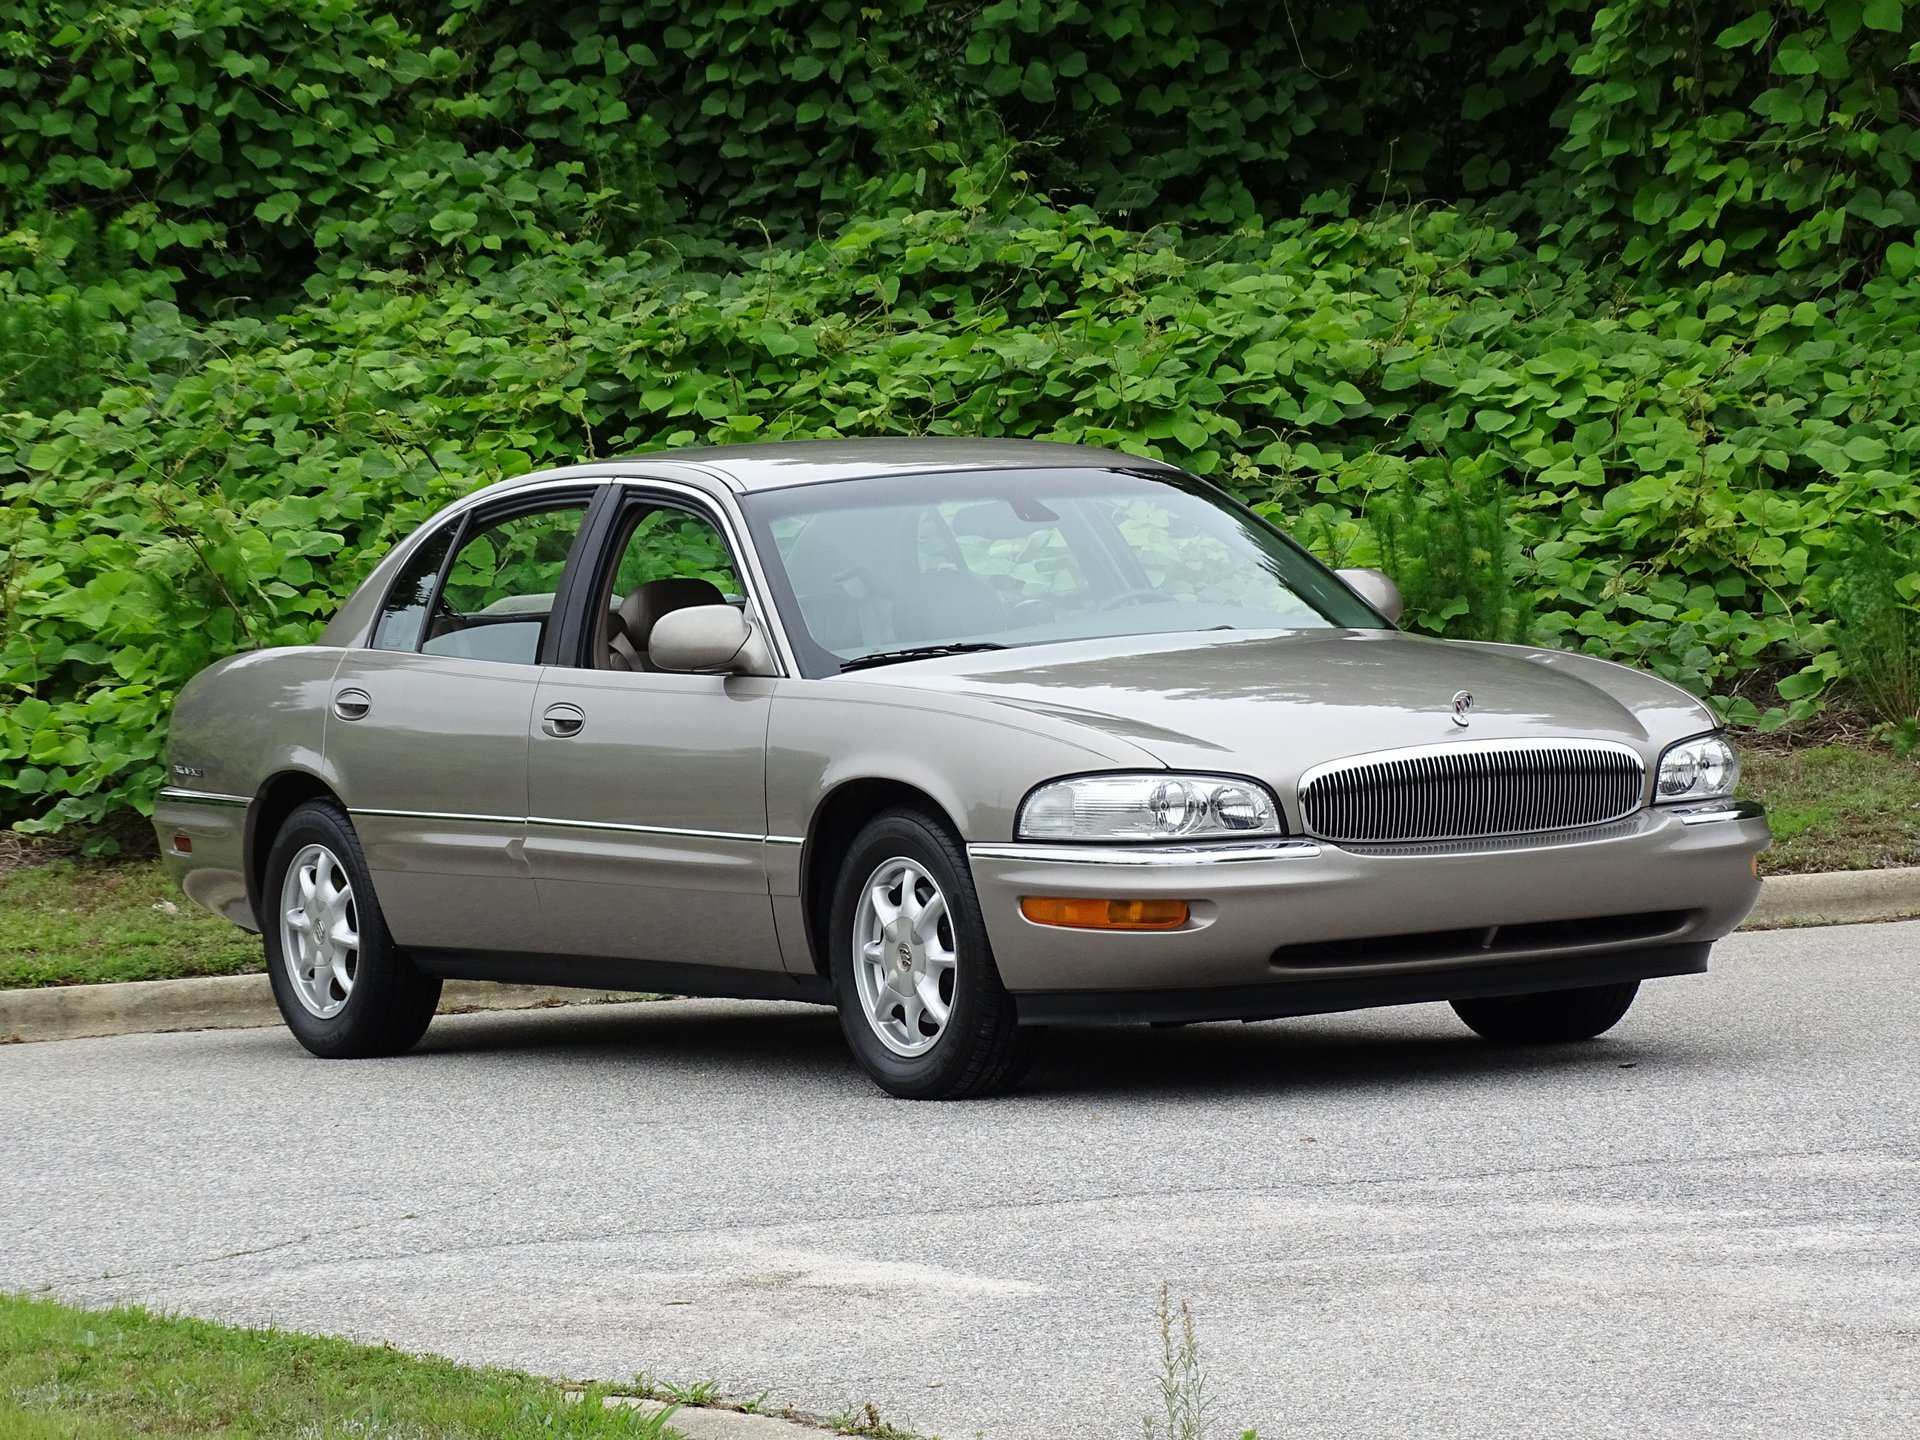 2001 Buick Park Avenue | Raleigh Classic Car Auctions